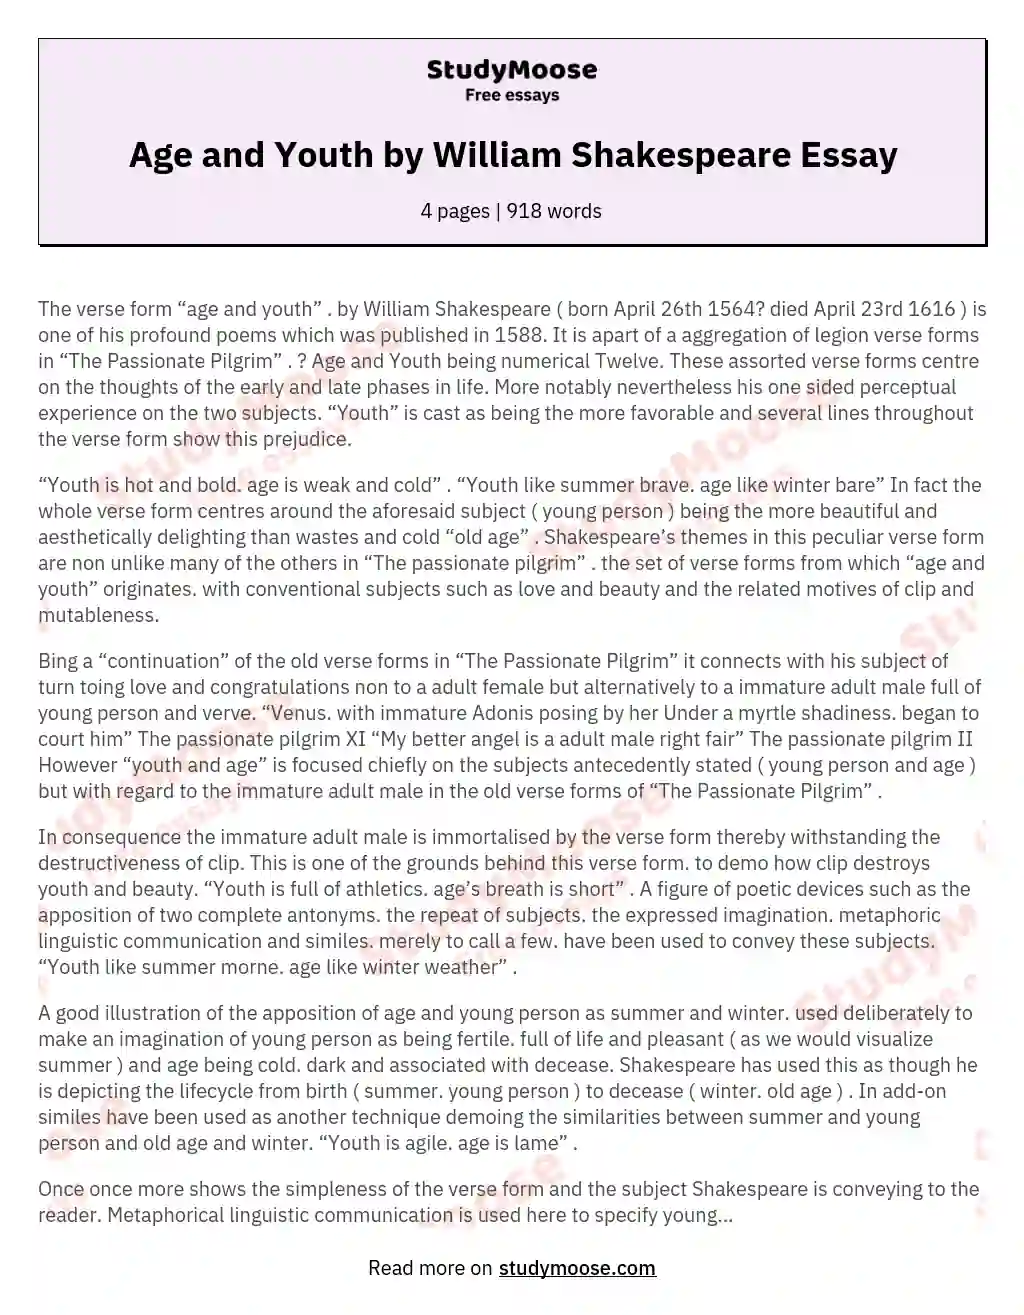 Age and Youth by William Shakespeare Essay essay